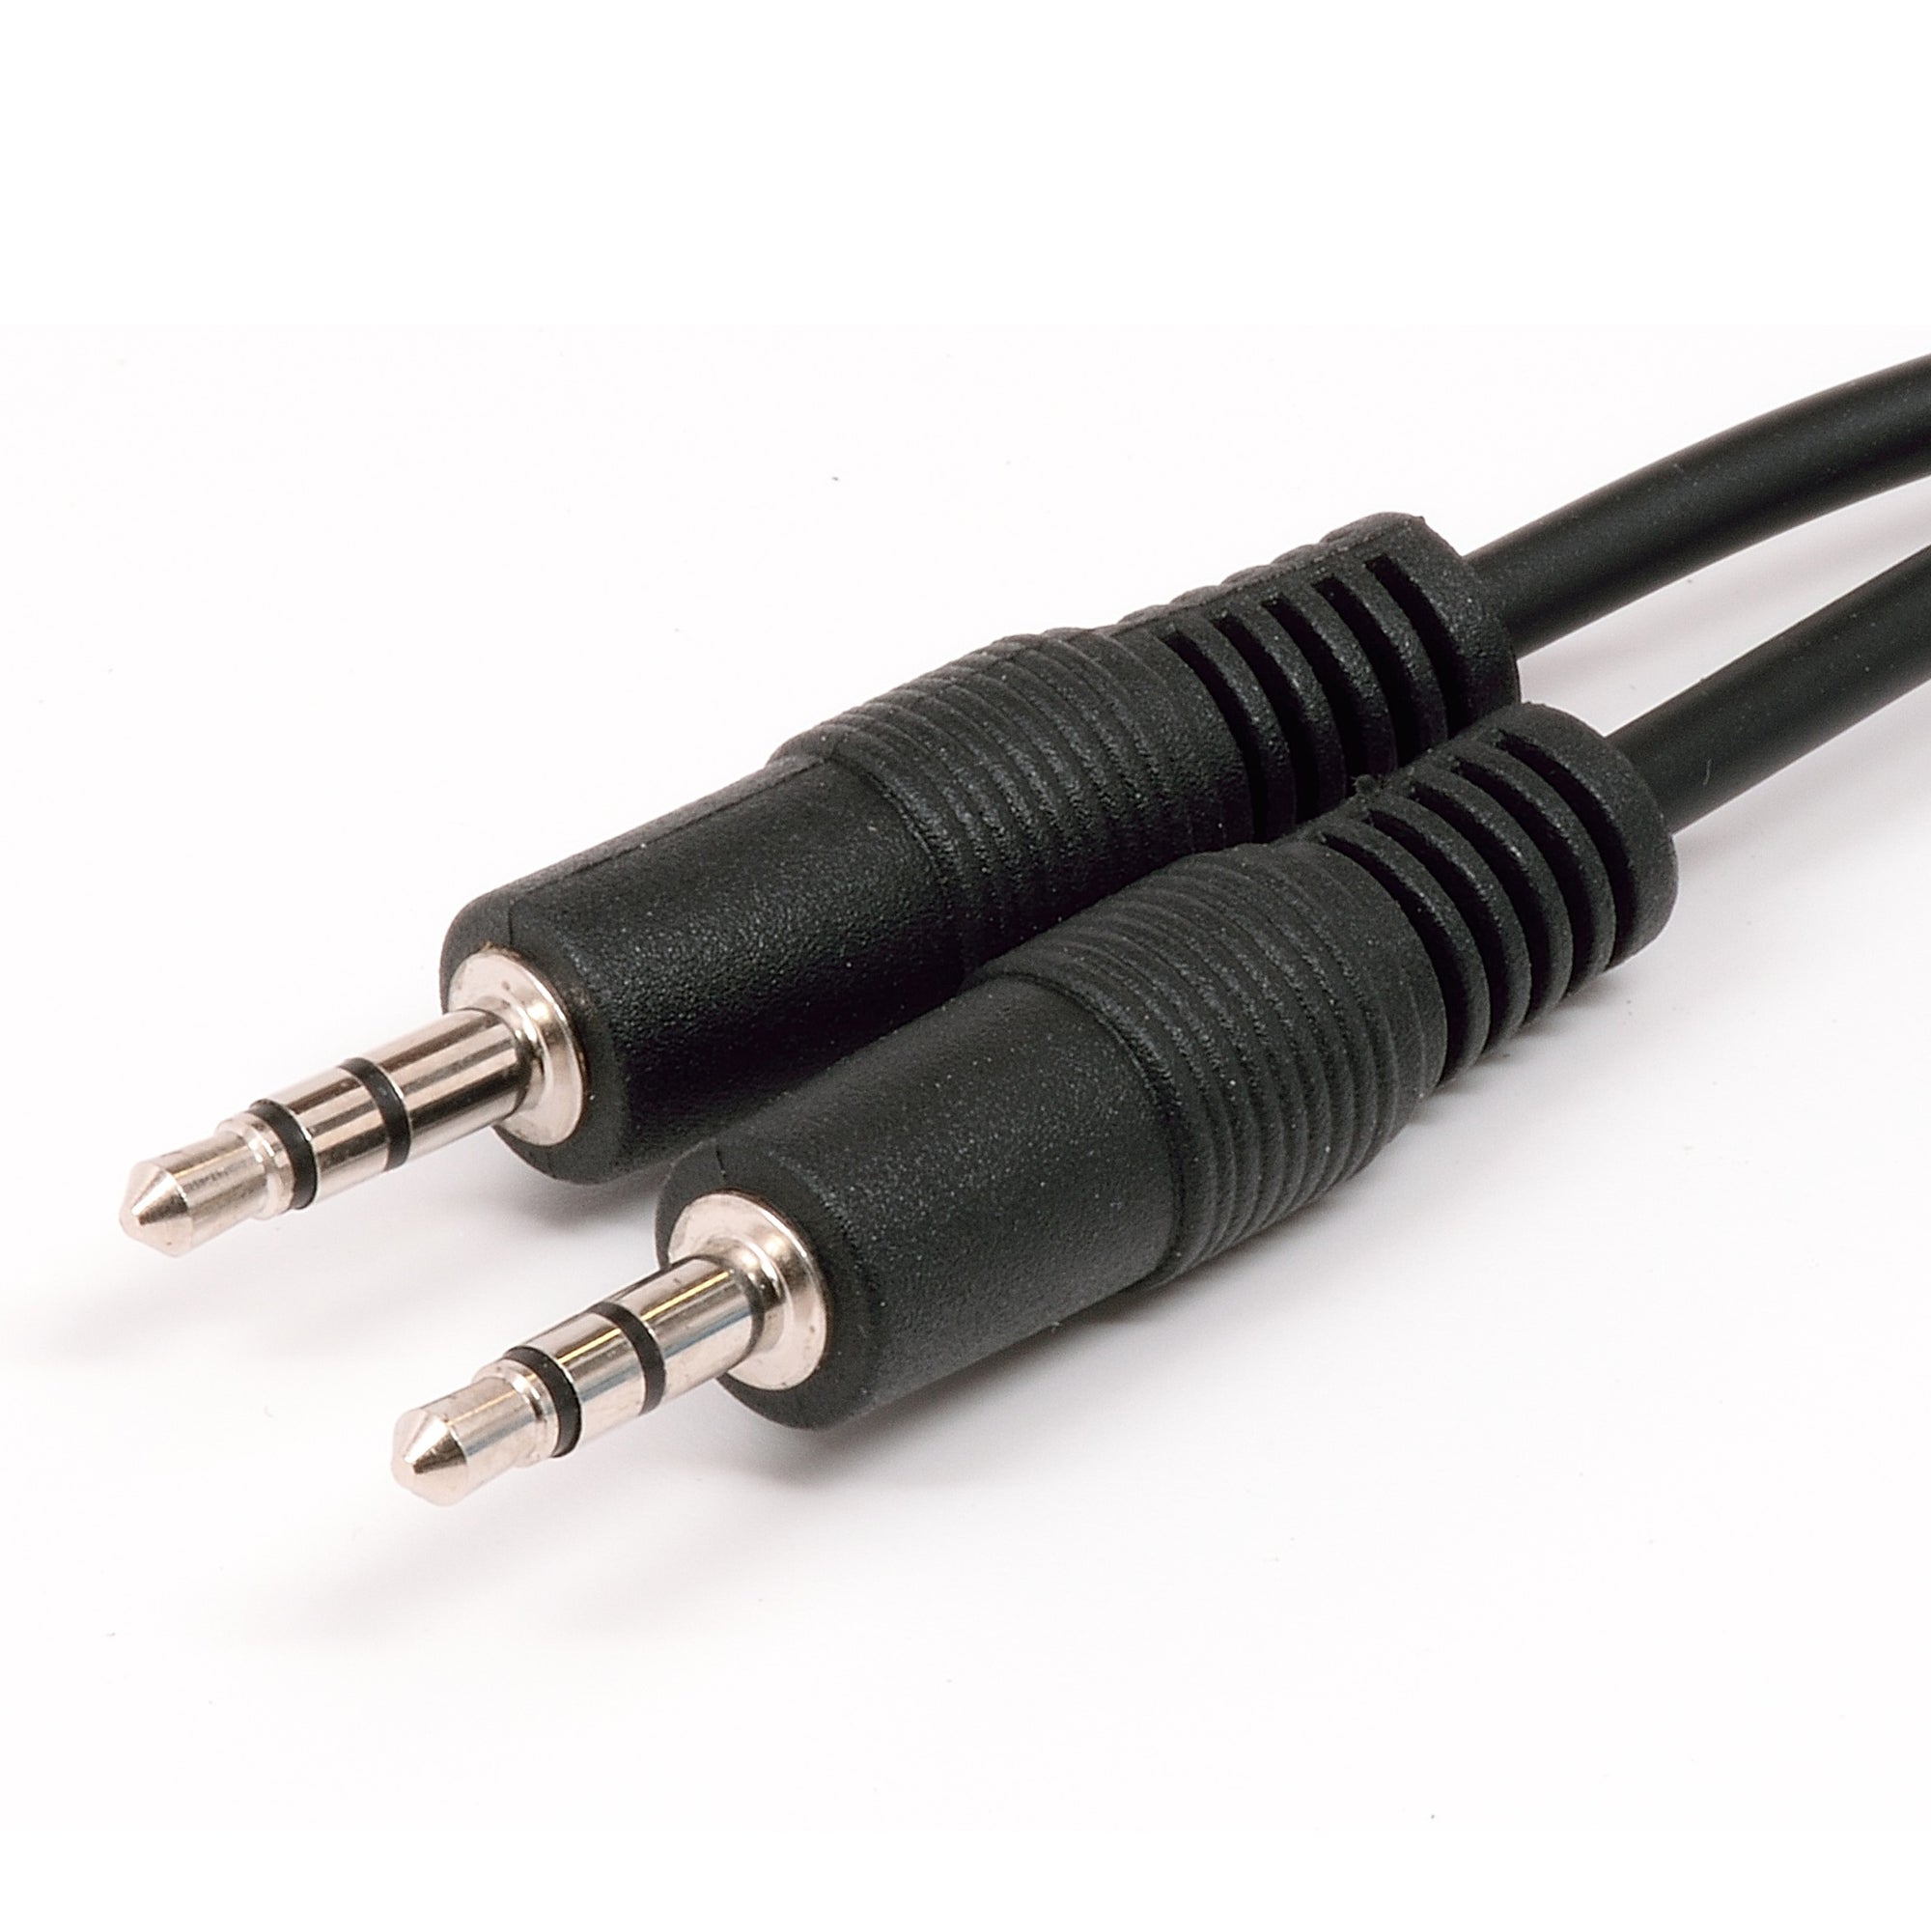 TOSLINK Optical Cable with Metal Connectors for Digital Audio - Benchmark  Media Systems